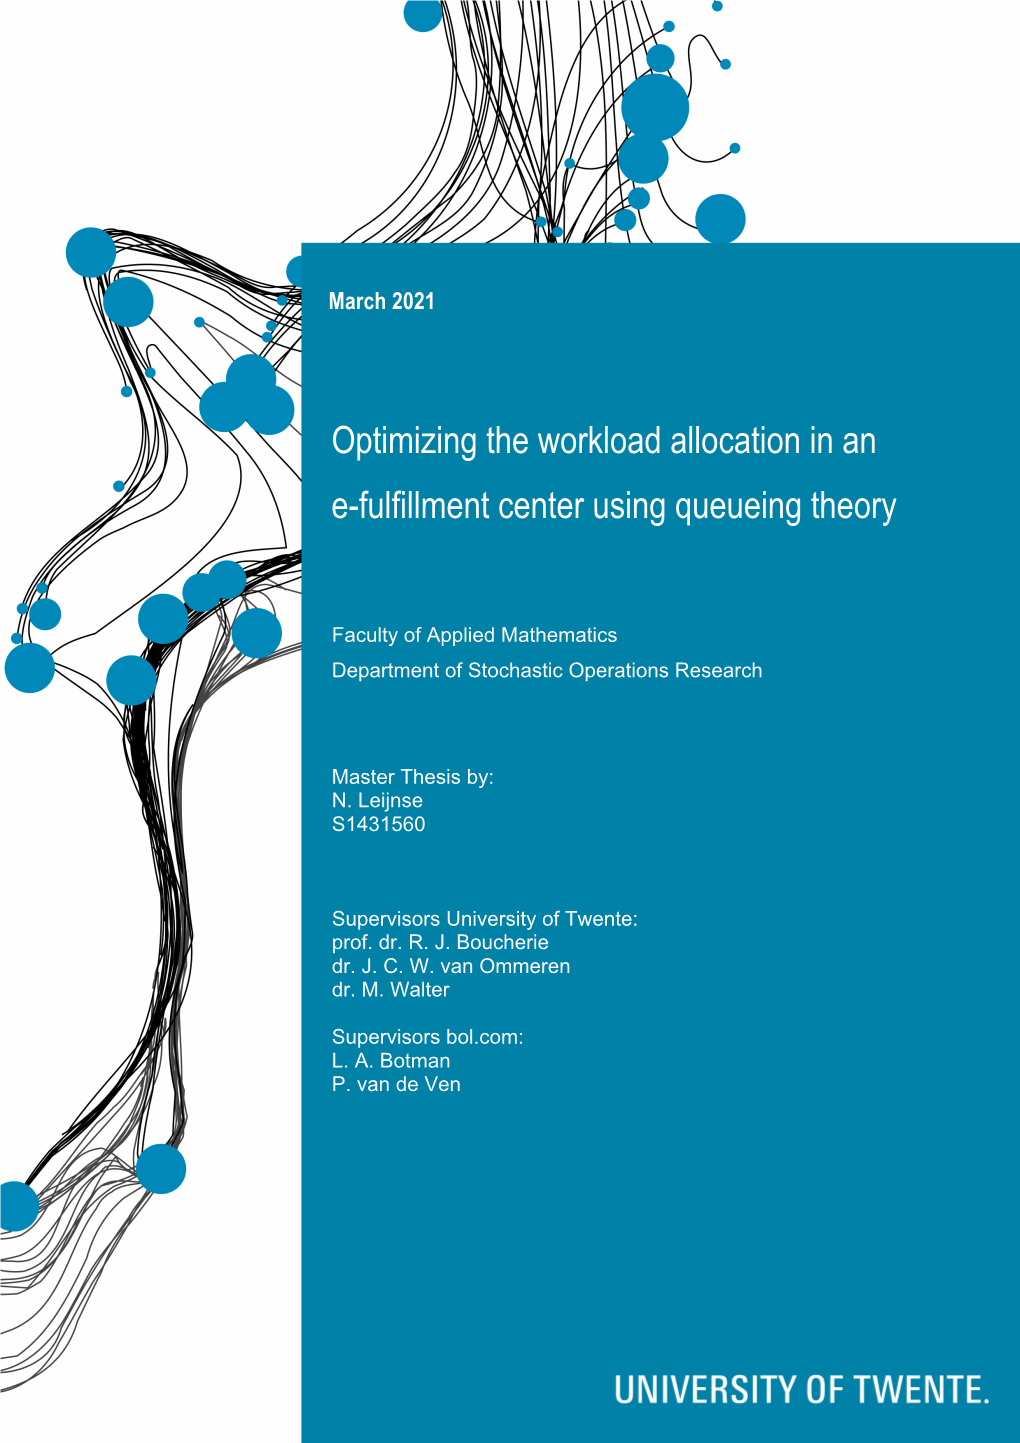 Optimizing the Workload Allocation in an E-Fulfillment Center Using Queueing Theory